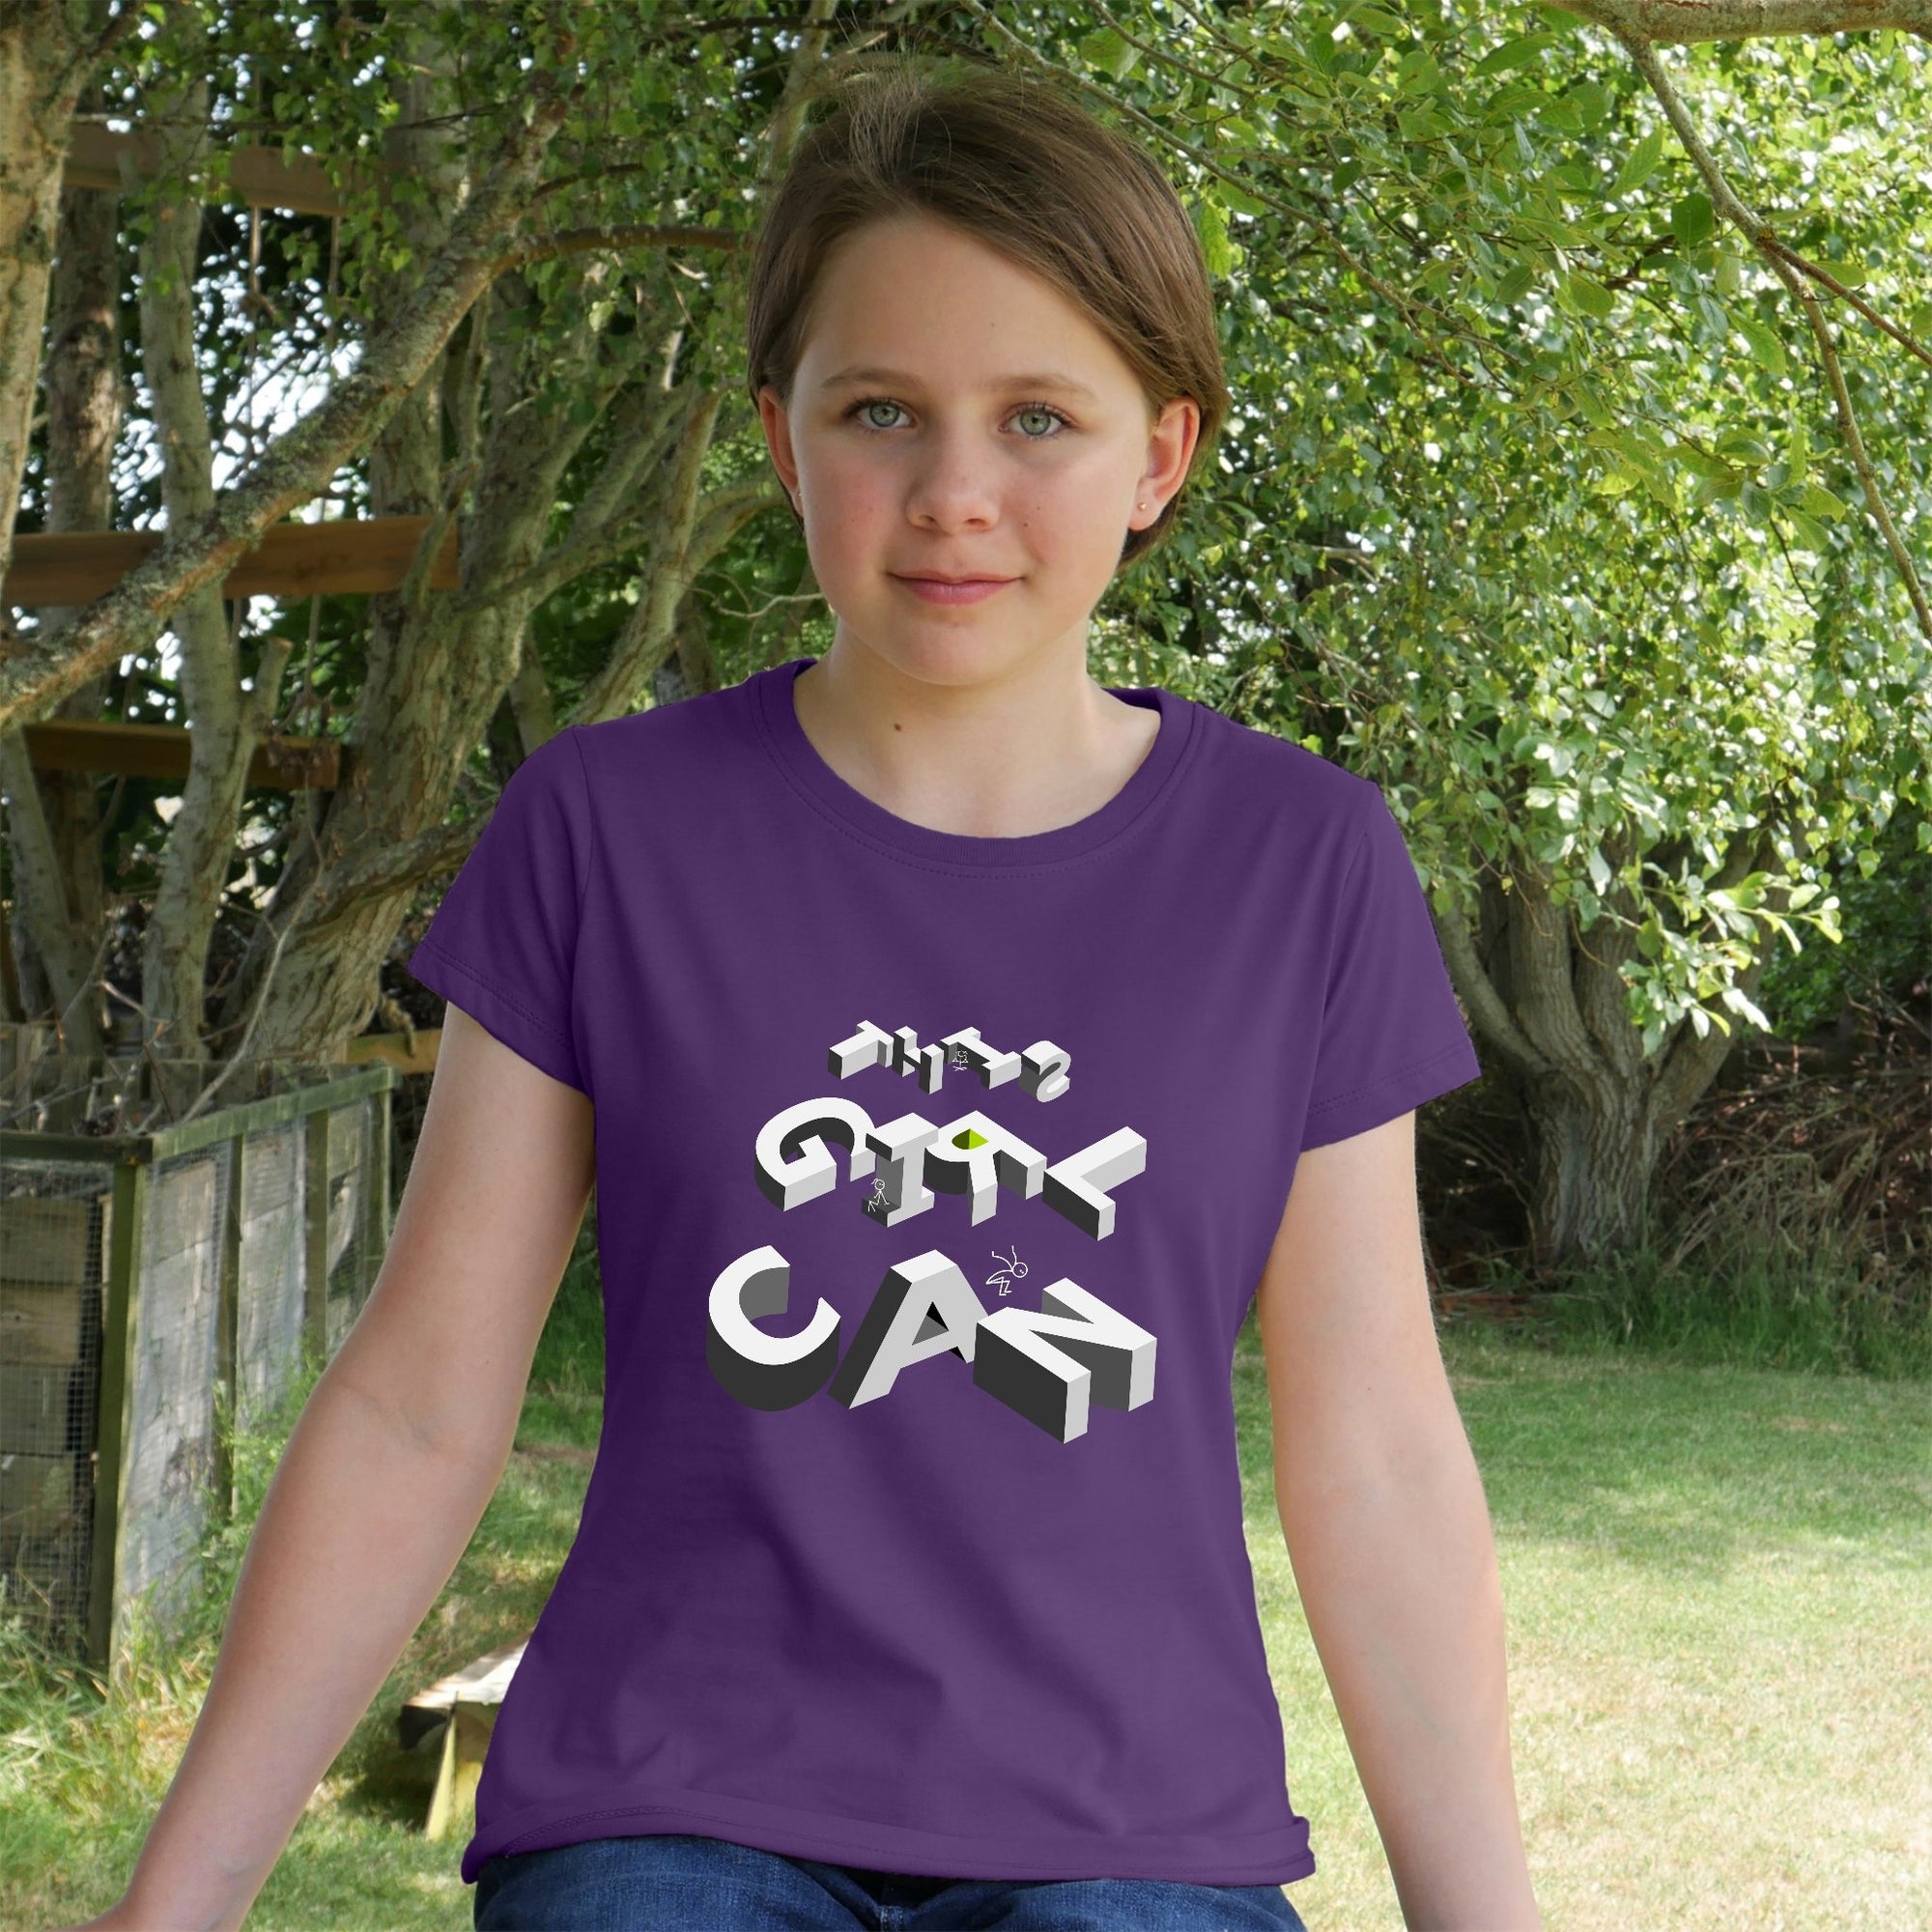 This Girl Can Parkour Organic Cotton Girls T-Shirt - Scarf Monkey